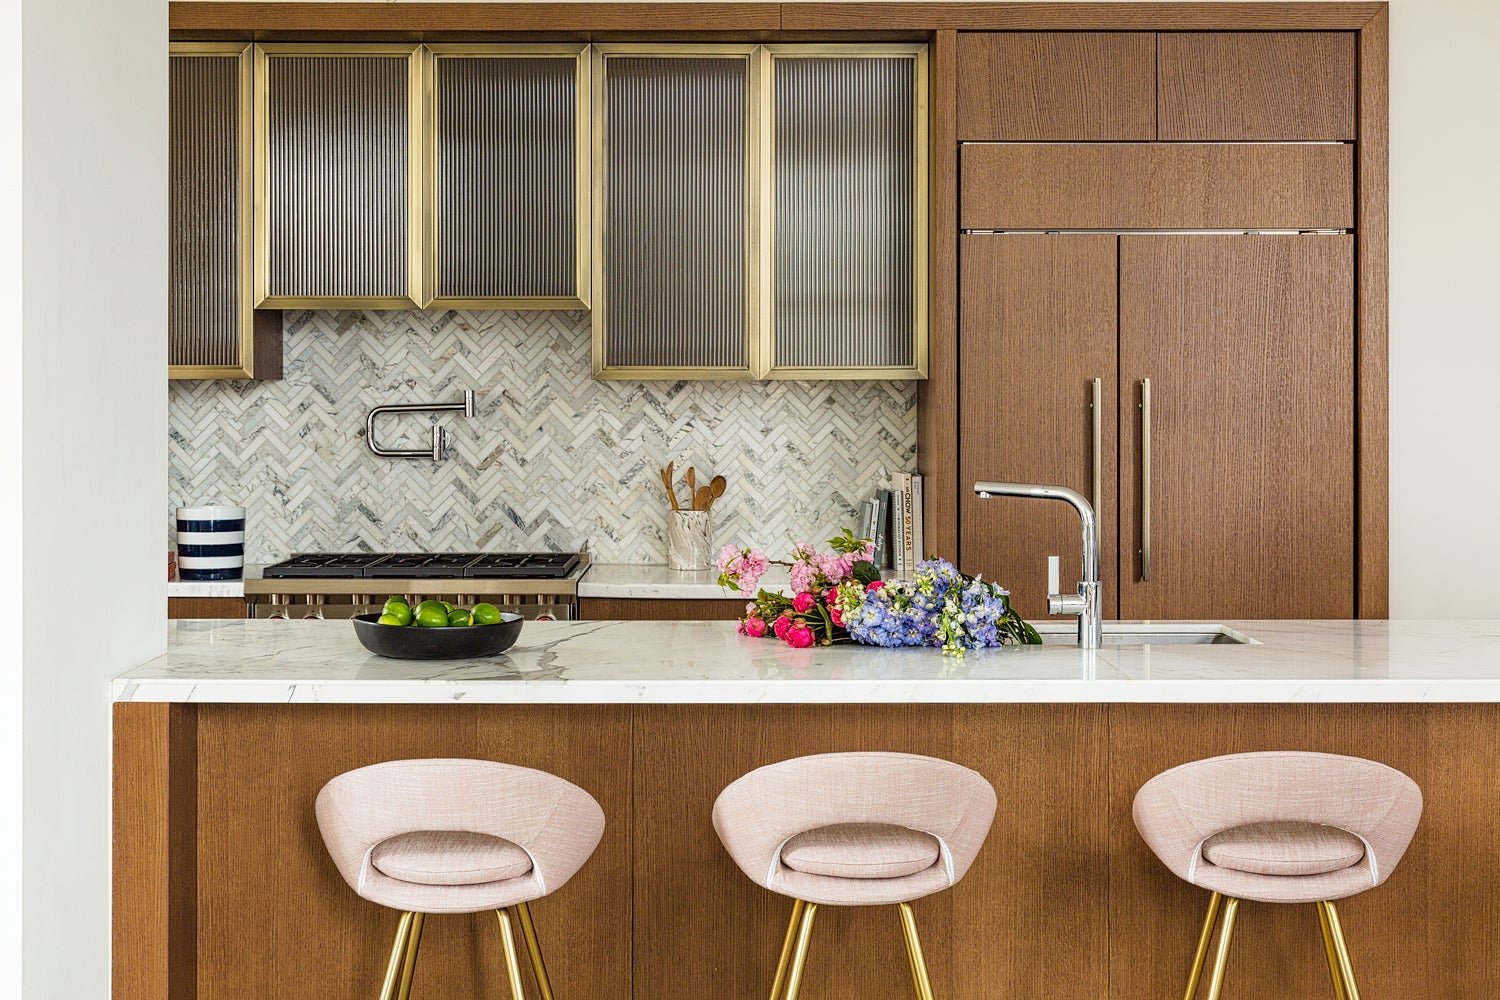 70% of Homeowners Don’t Know This Crucial Kitchen Countertop Fact